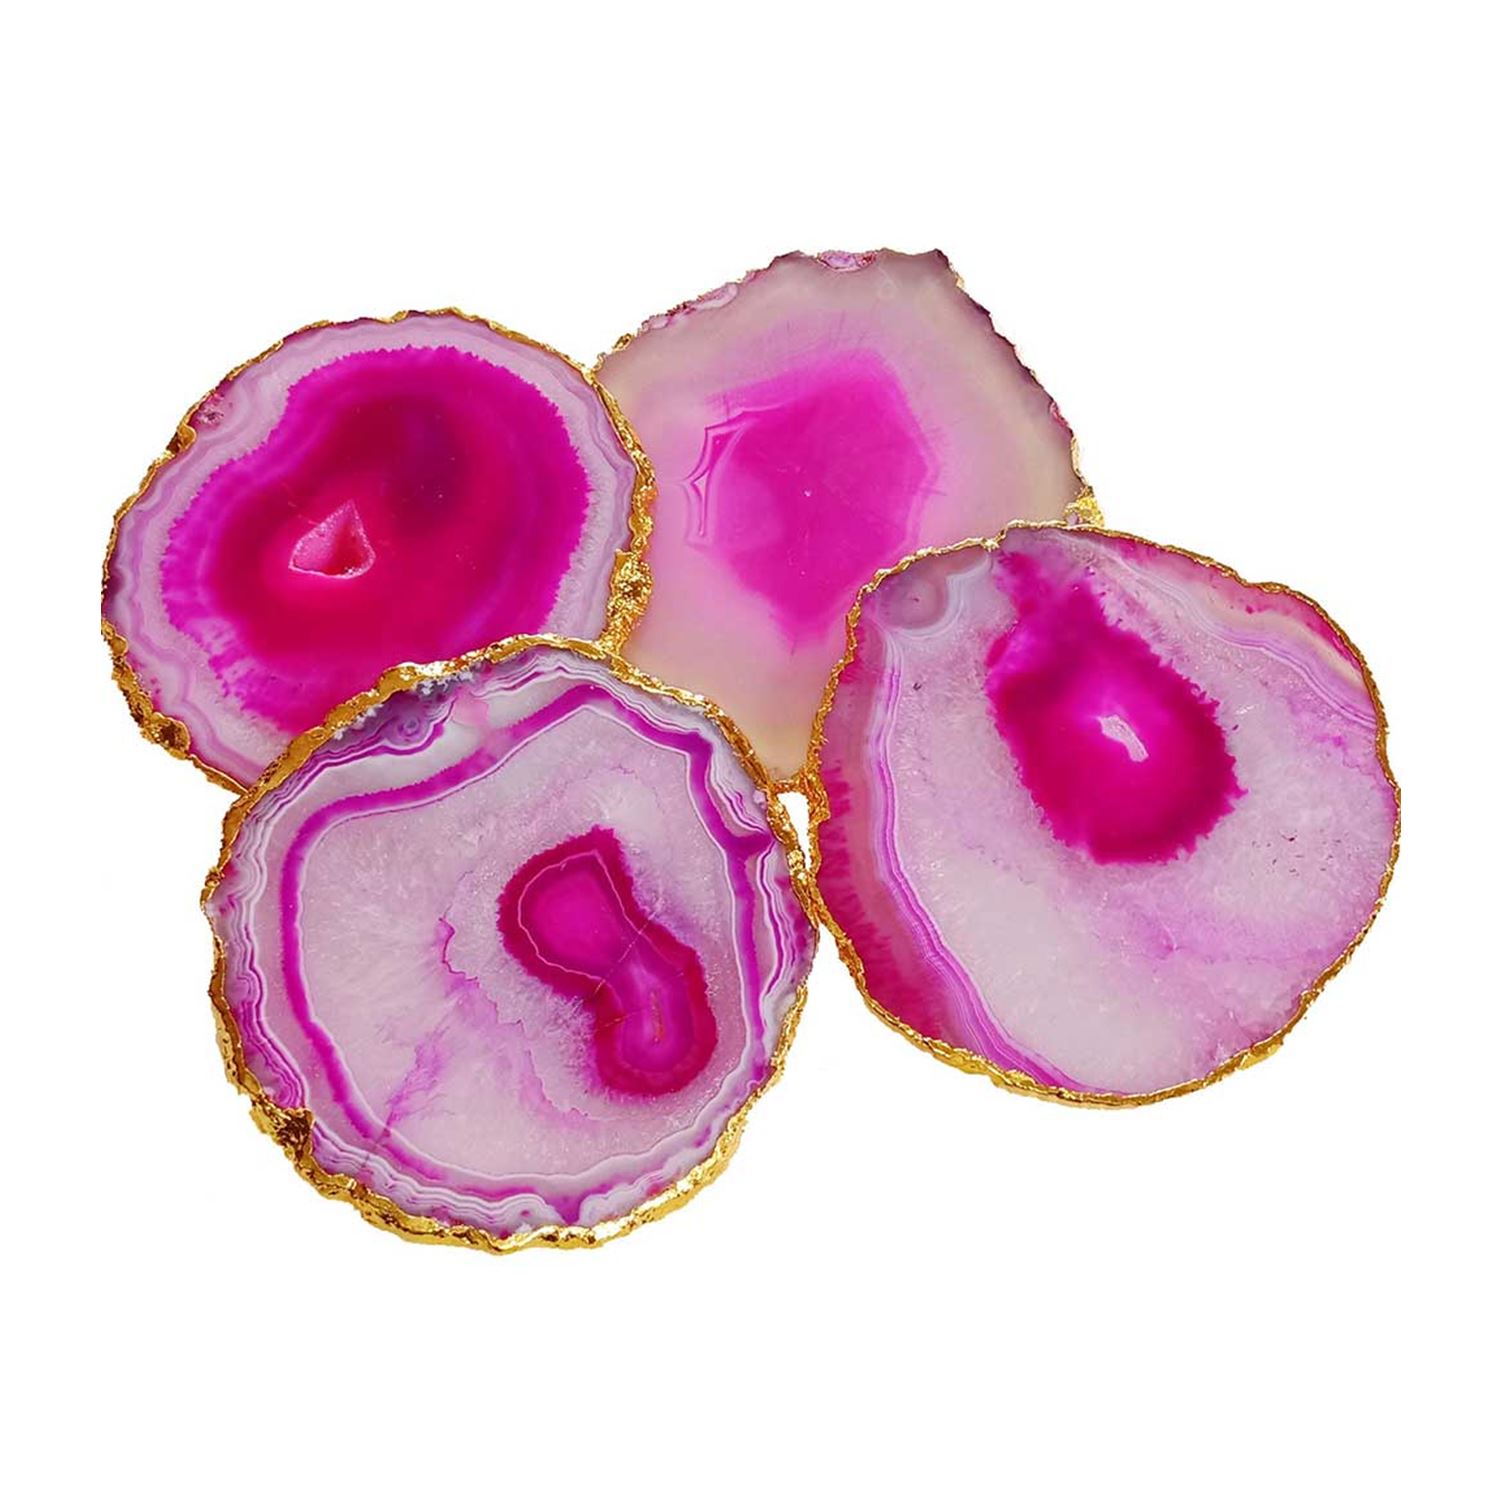 agate-coasters-slices-pink